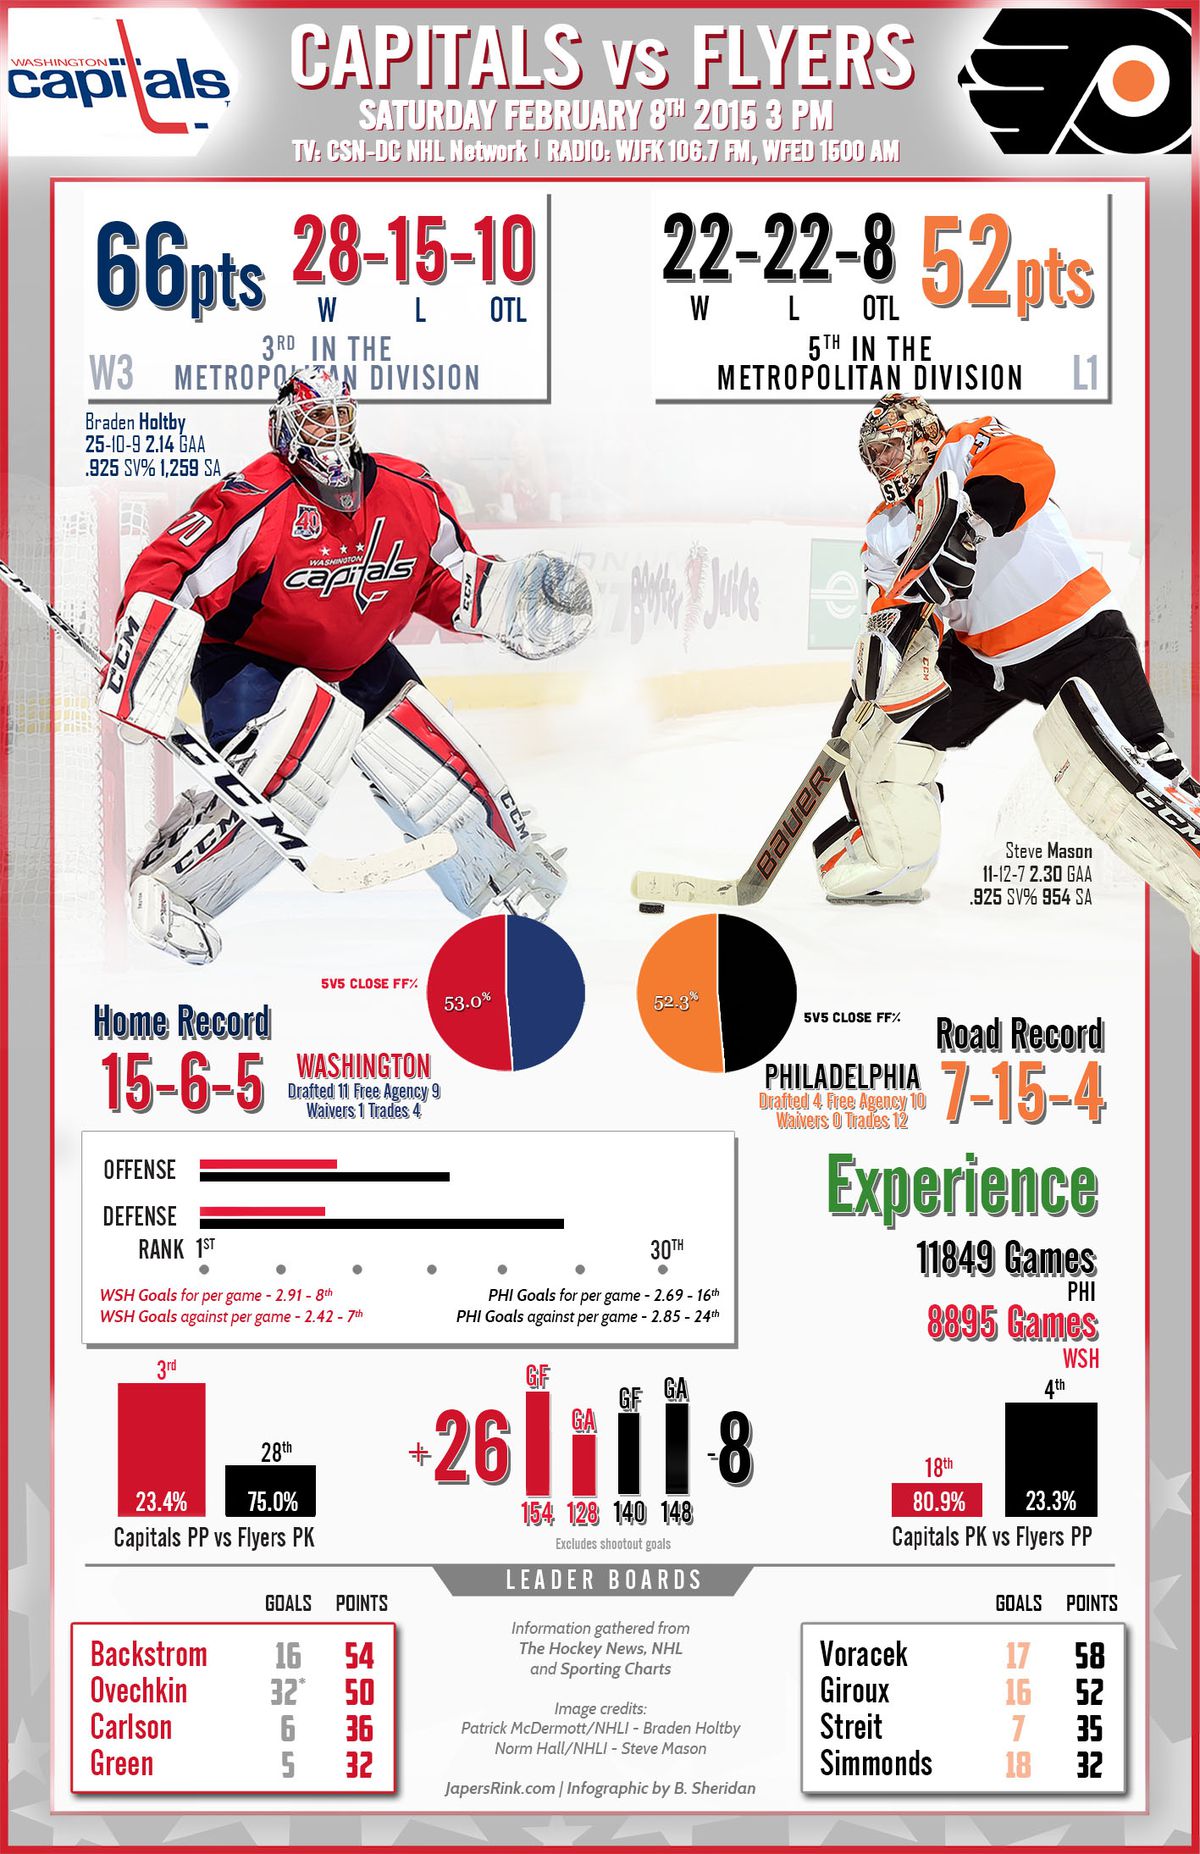 Caps-Flyers GD Graphic 2.8.15